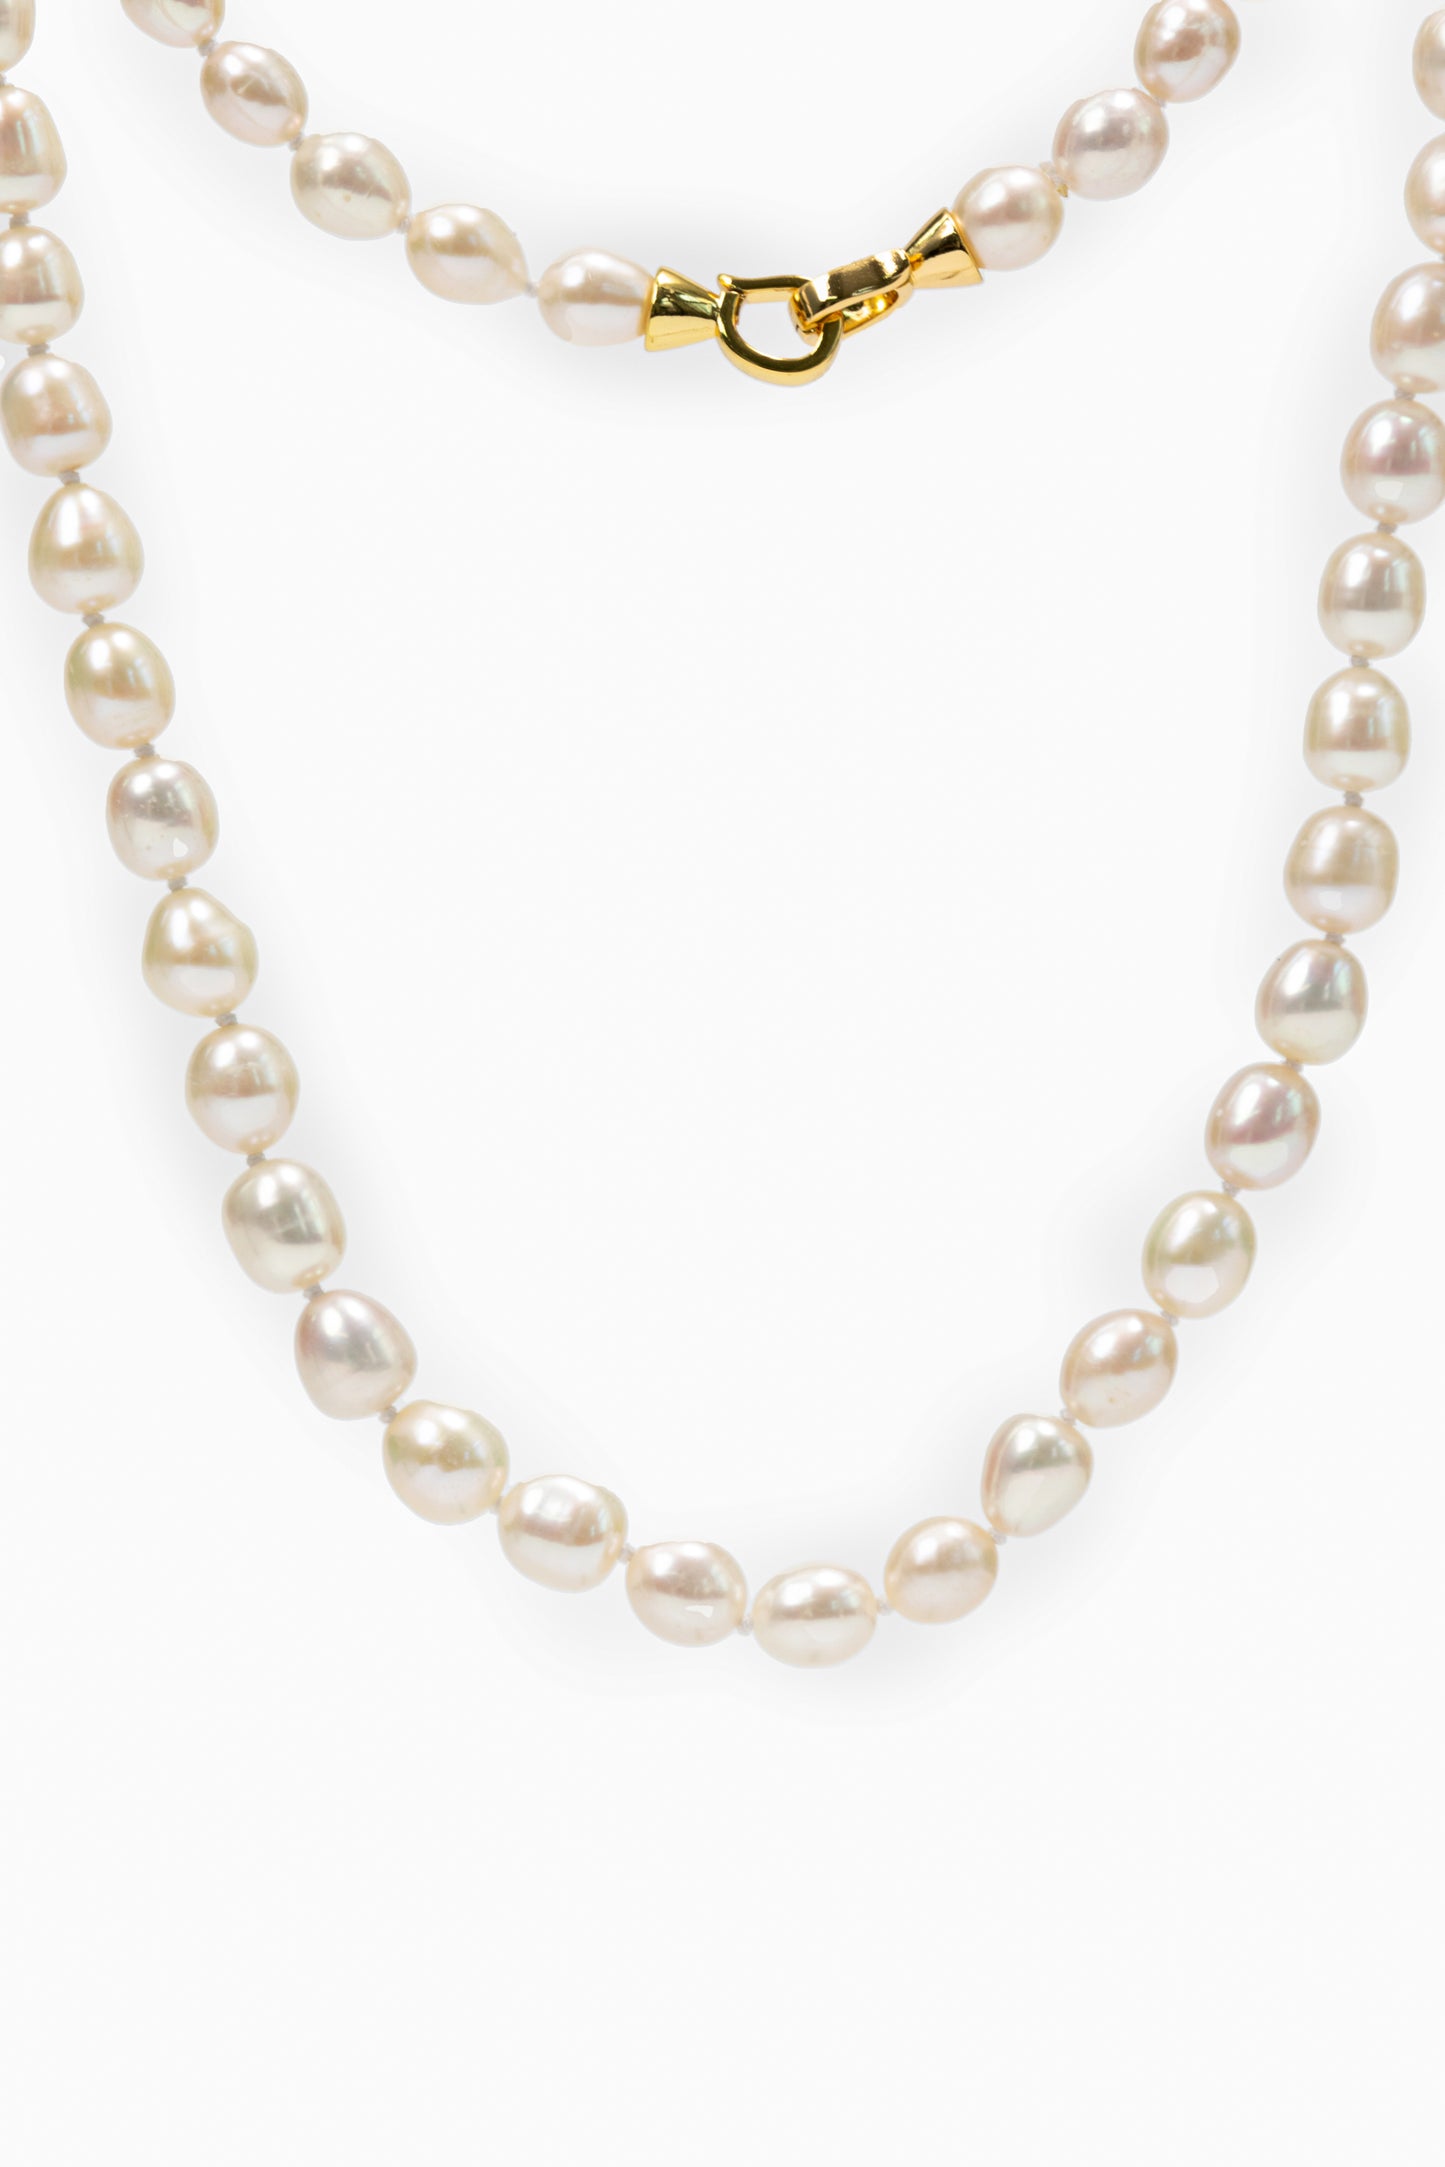 18K Gold Freshwater Pearls Necklace for Women